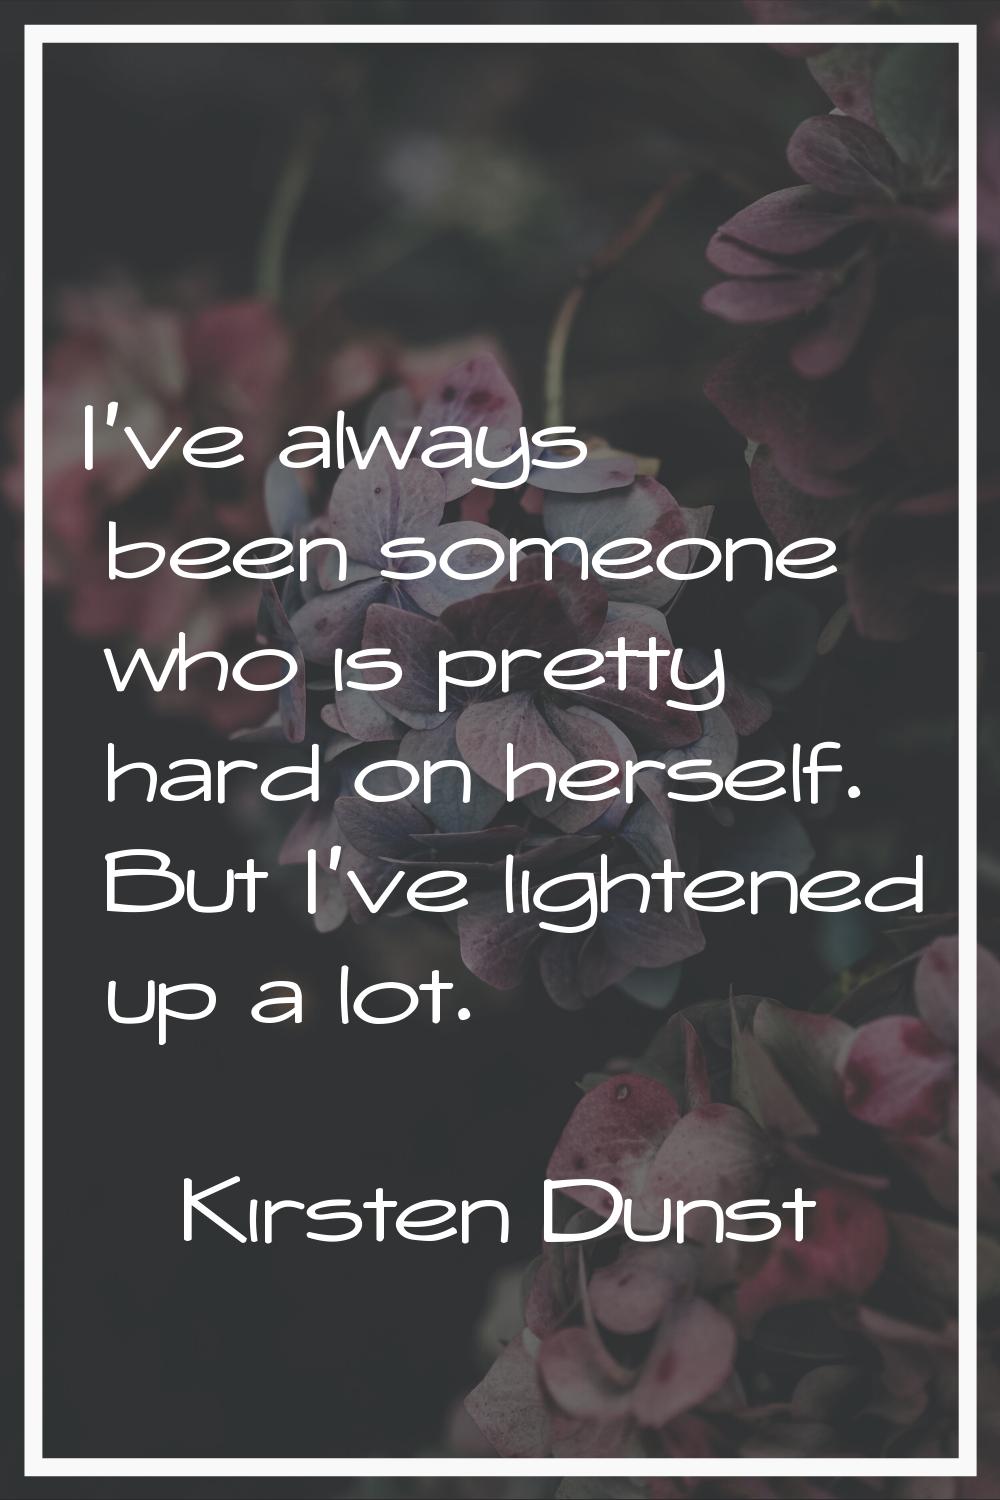 I've always been someone who is pretty hard on herself. But I've lightened up a lot.